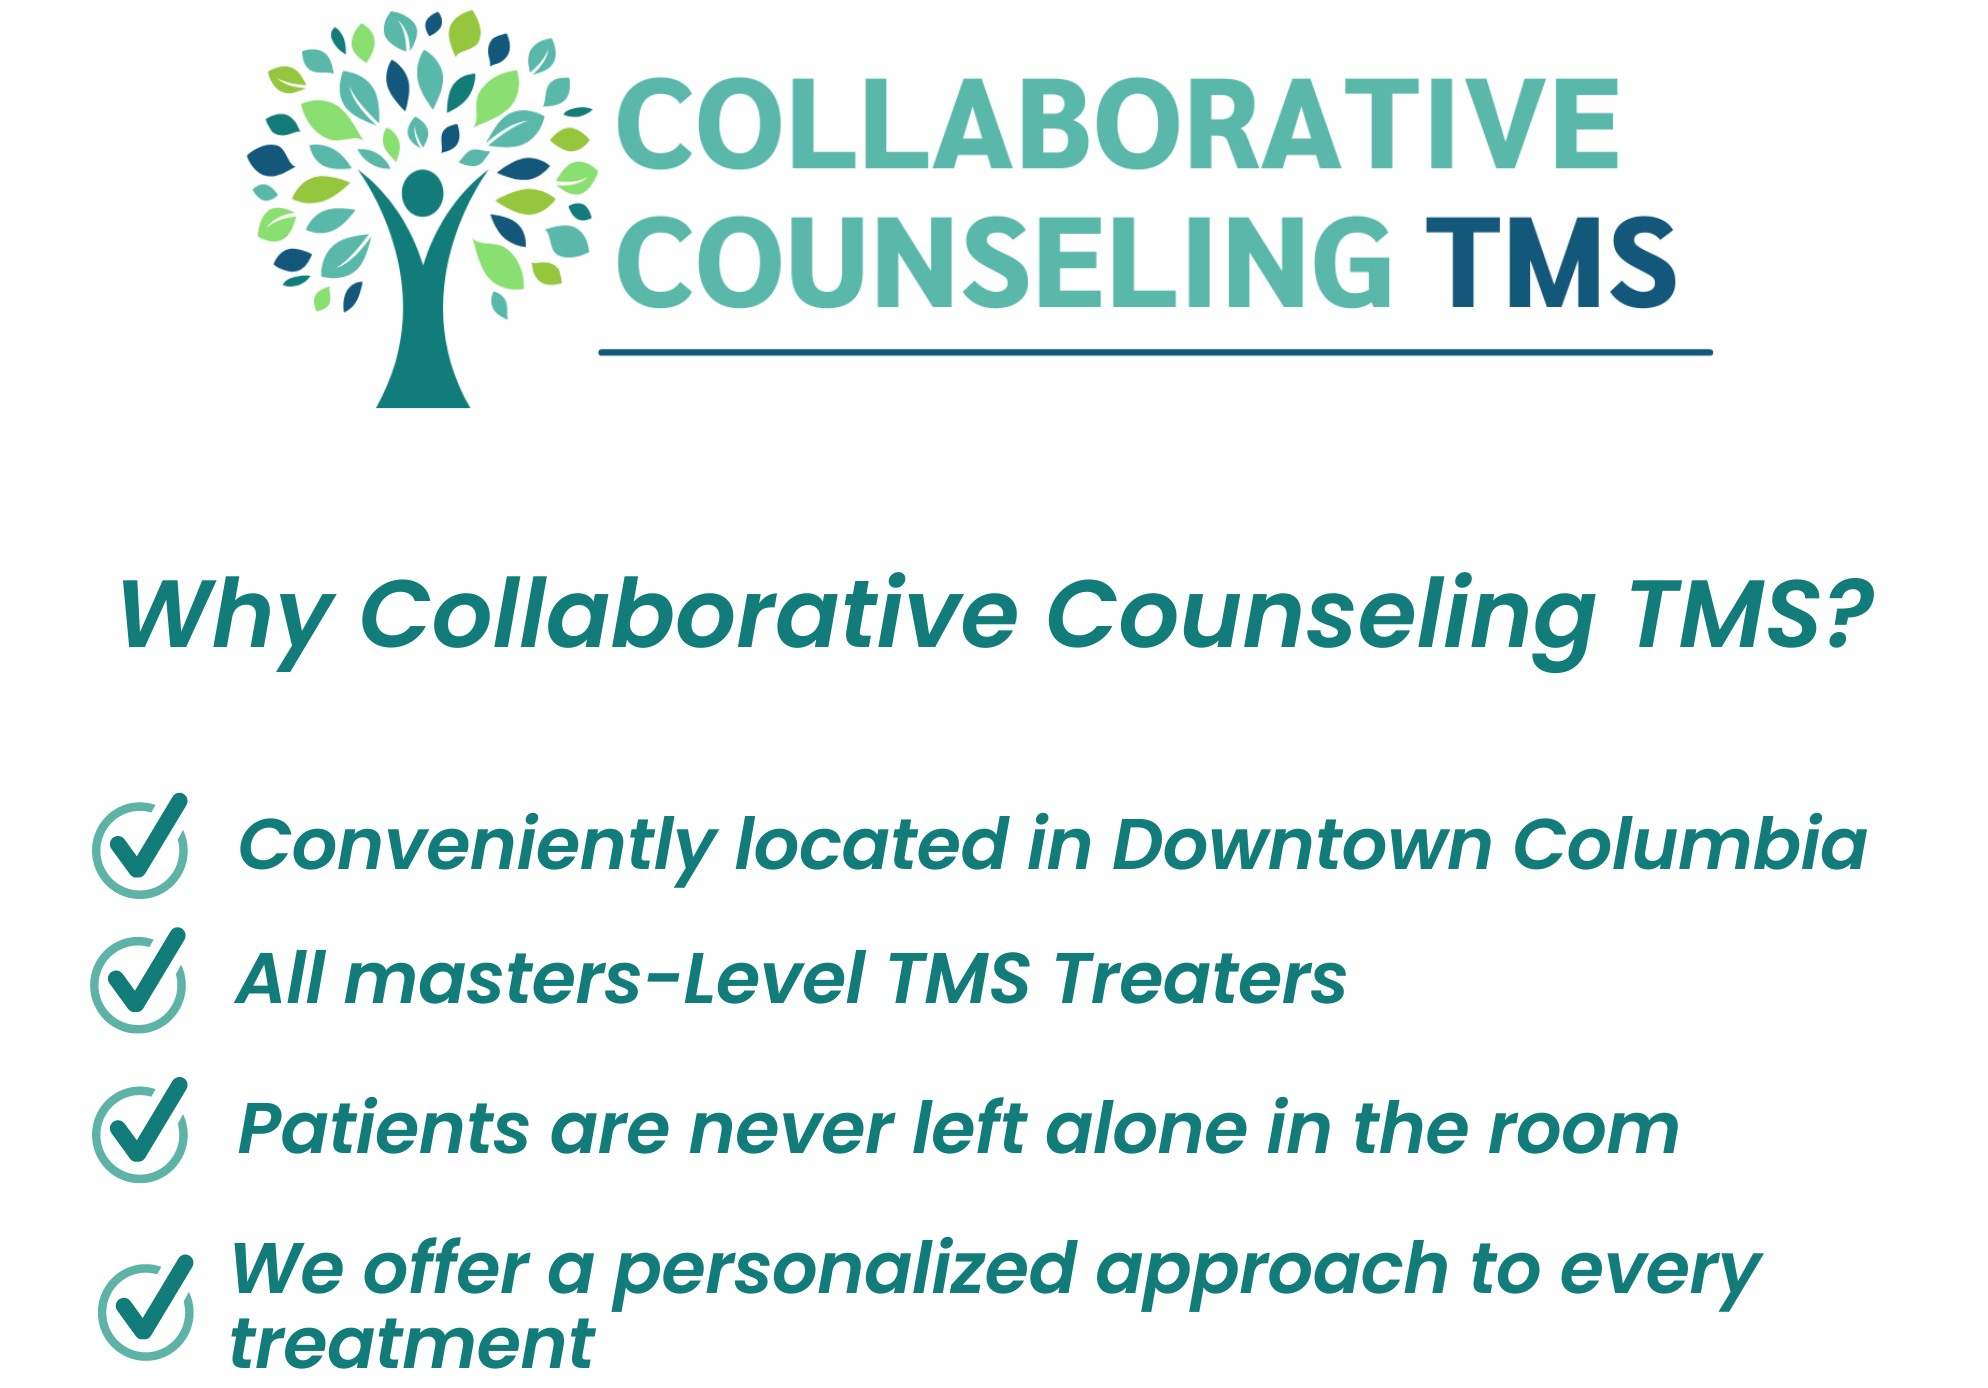 Collaborative Counseling TMS logo